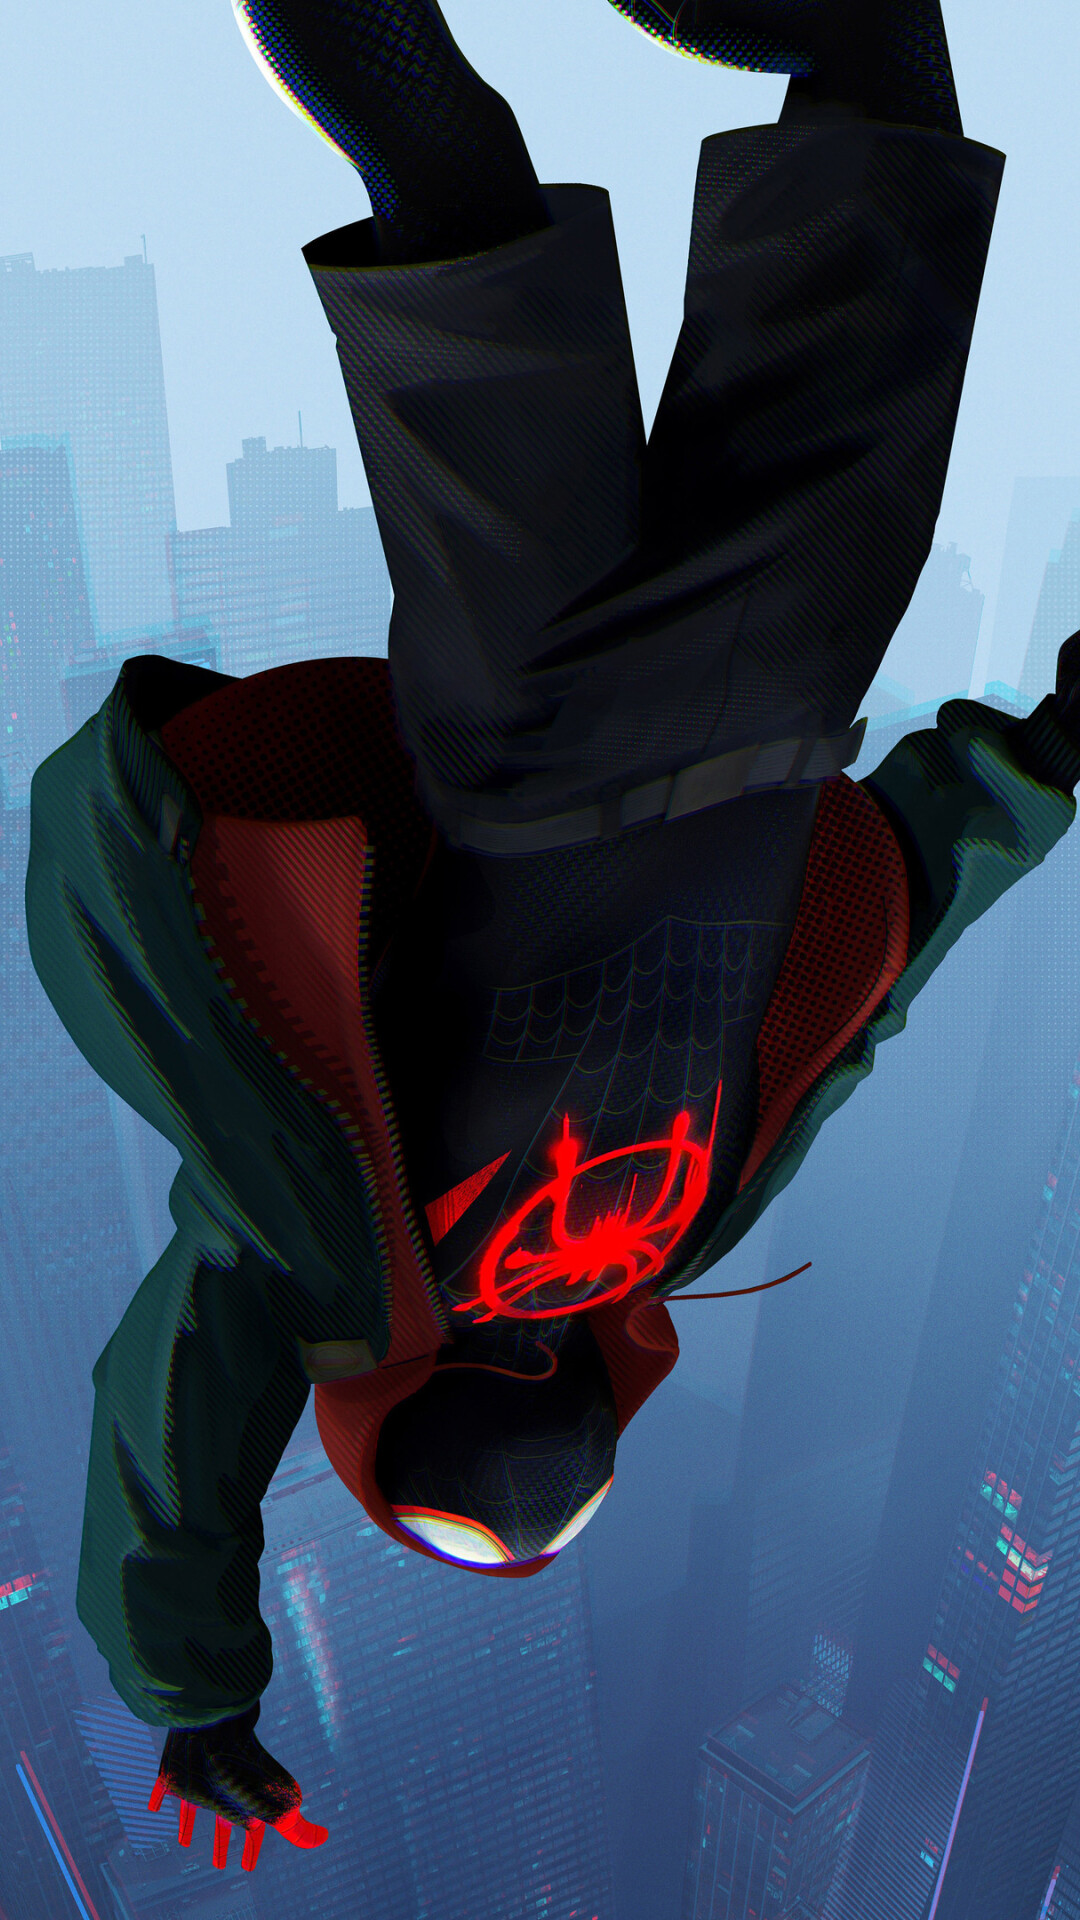 Spider-Man: Into the Spider-Verse: Bob Persichetti and Rodney Rothman's feature directorial debuts. 1080x1920 Full HD Wallpaper.